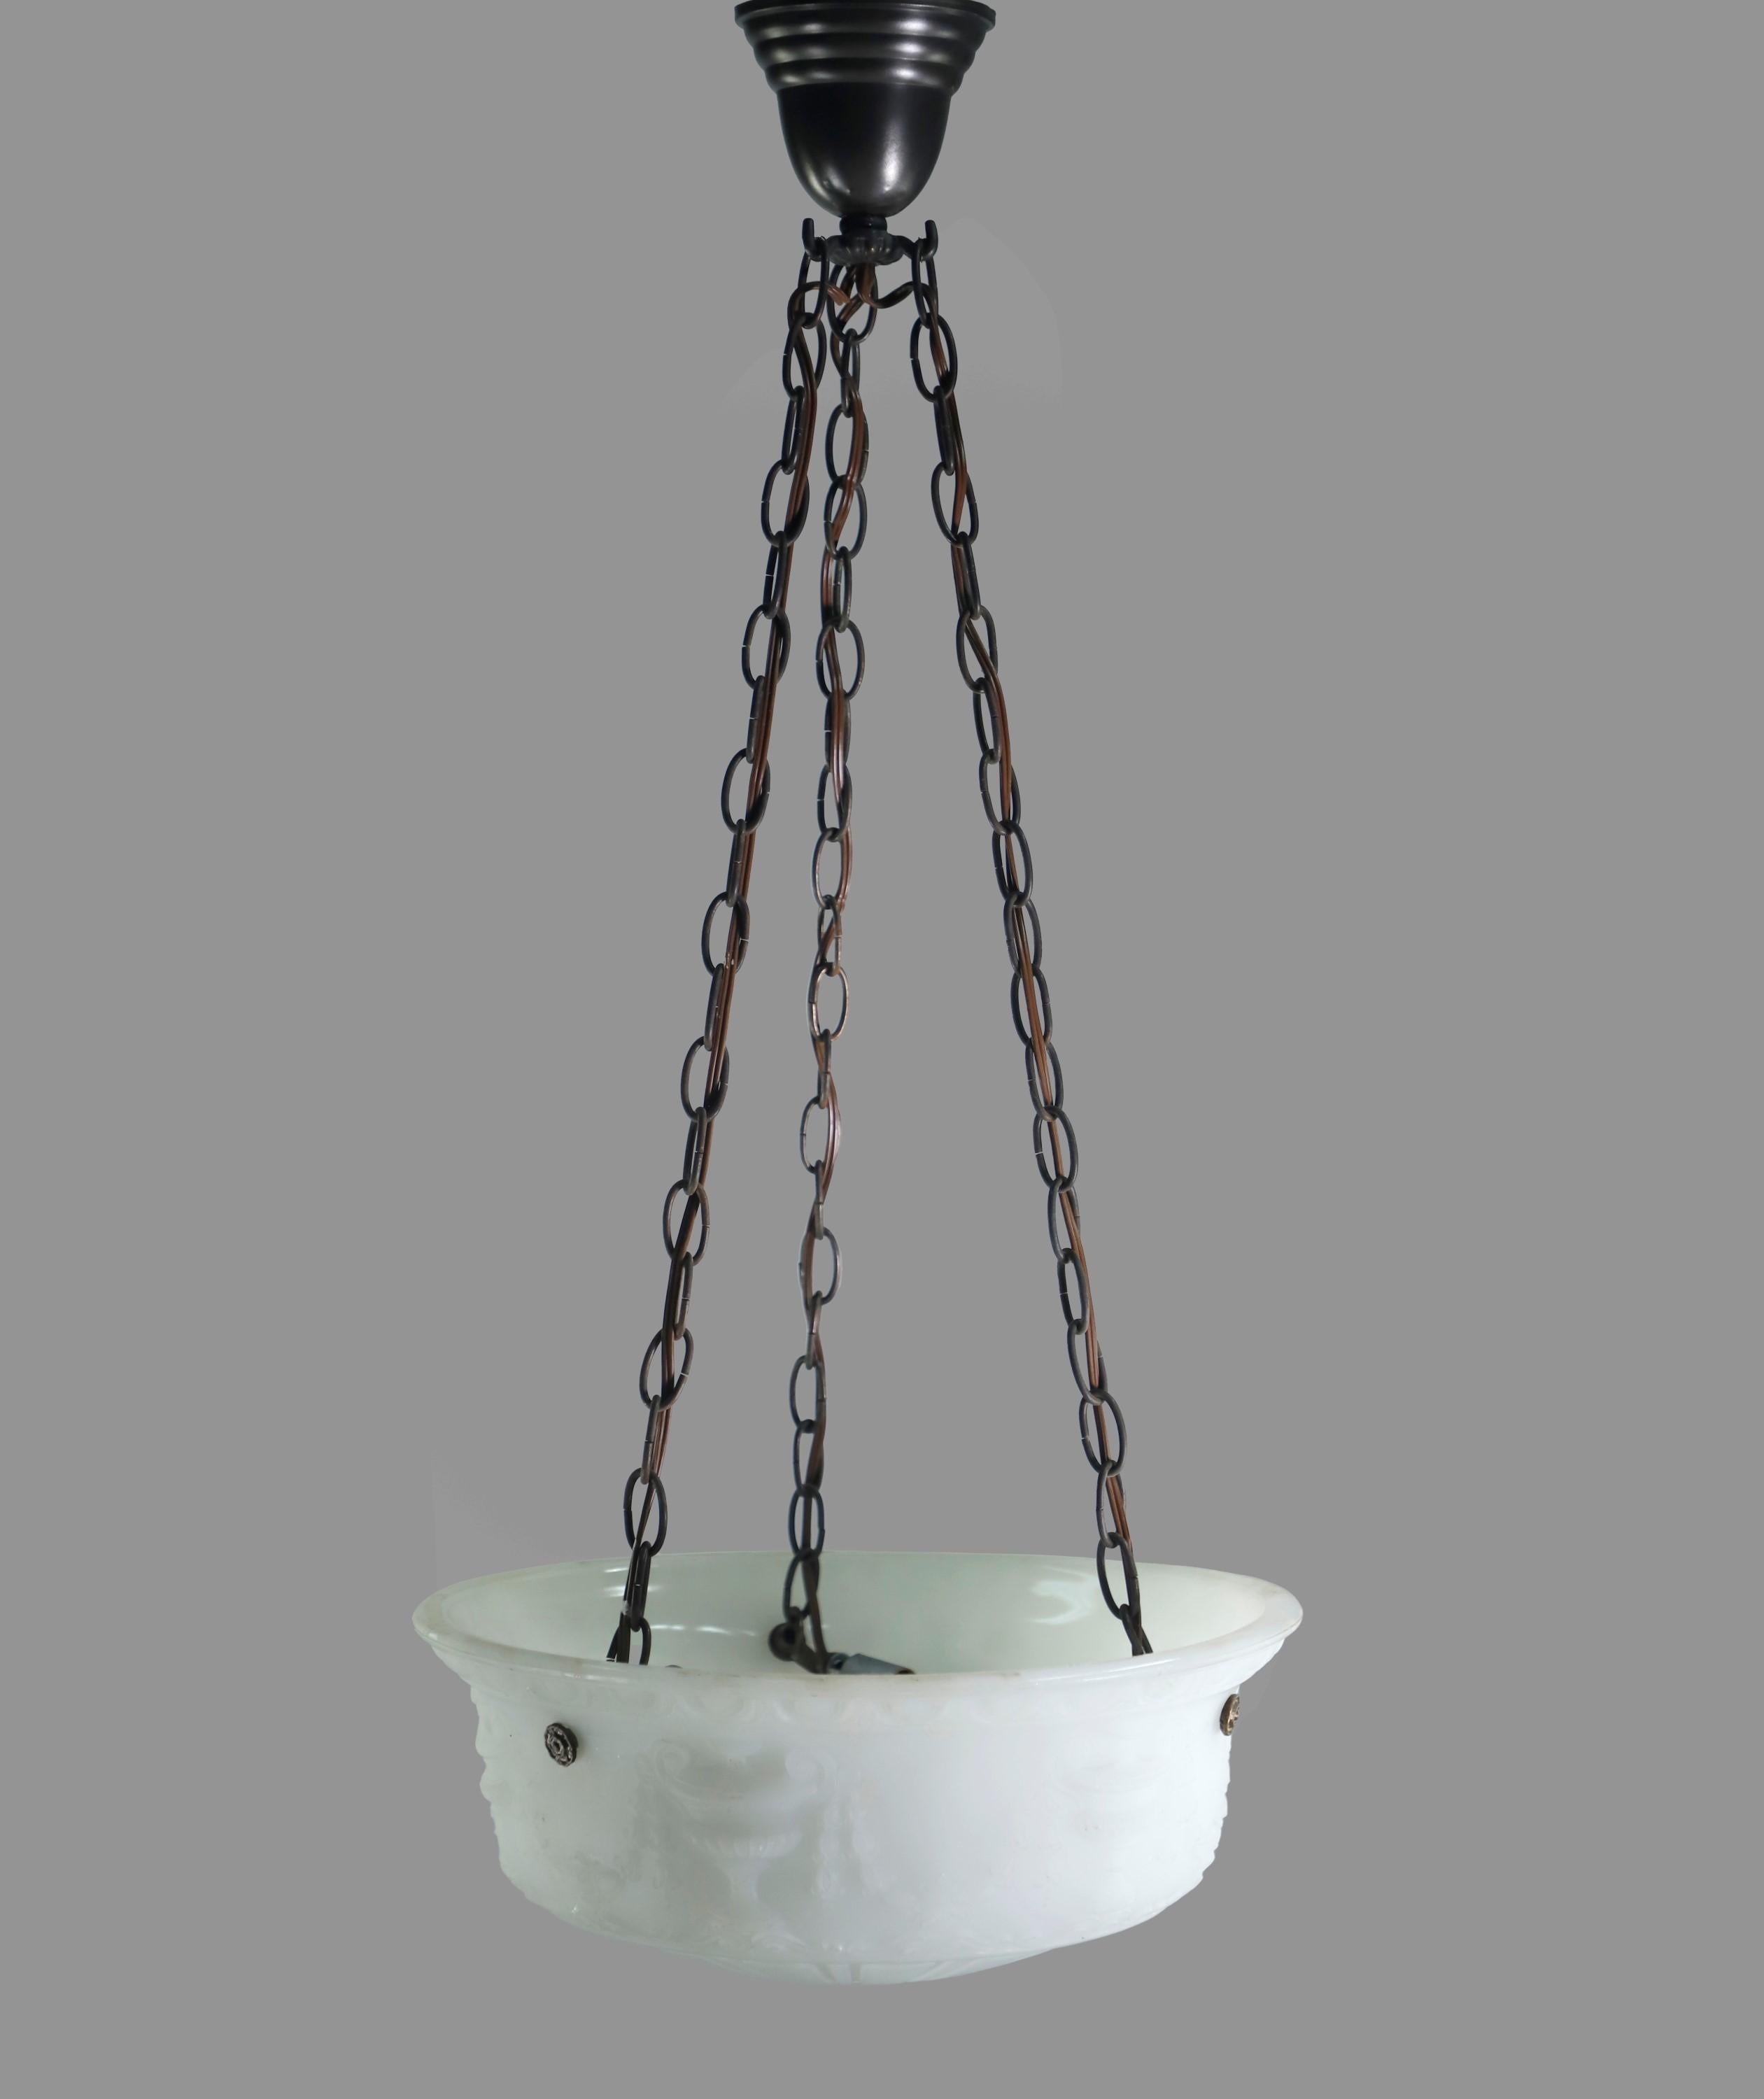 Early 20th Century cast white milk glass dish pendant light featuring urns, swags, and a Greek egg and dart design. Dish is suspended by three black finish chains from an original canopy. Cleaned and restored. Takes three candelabra light bulbs.